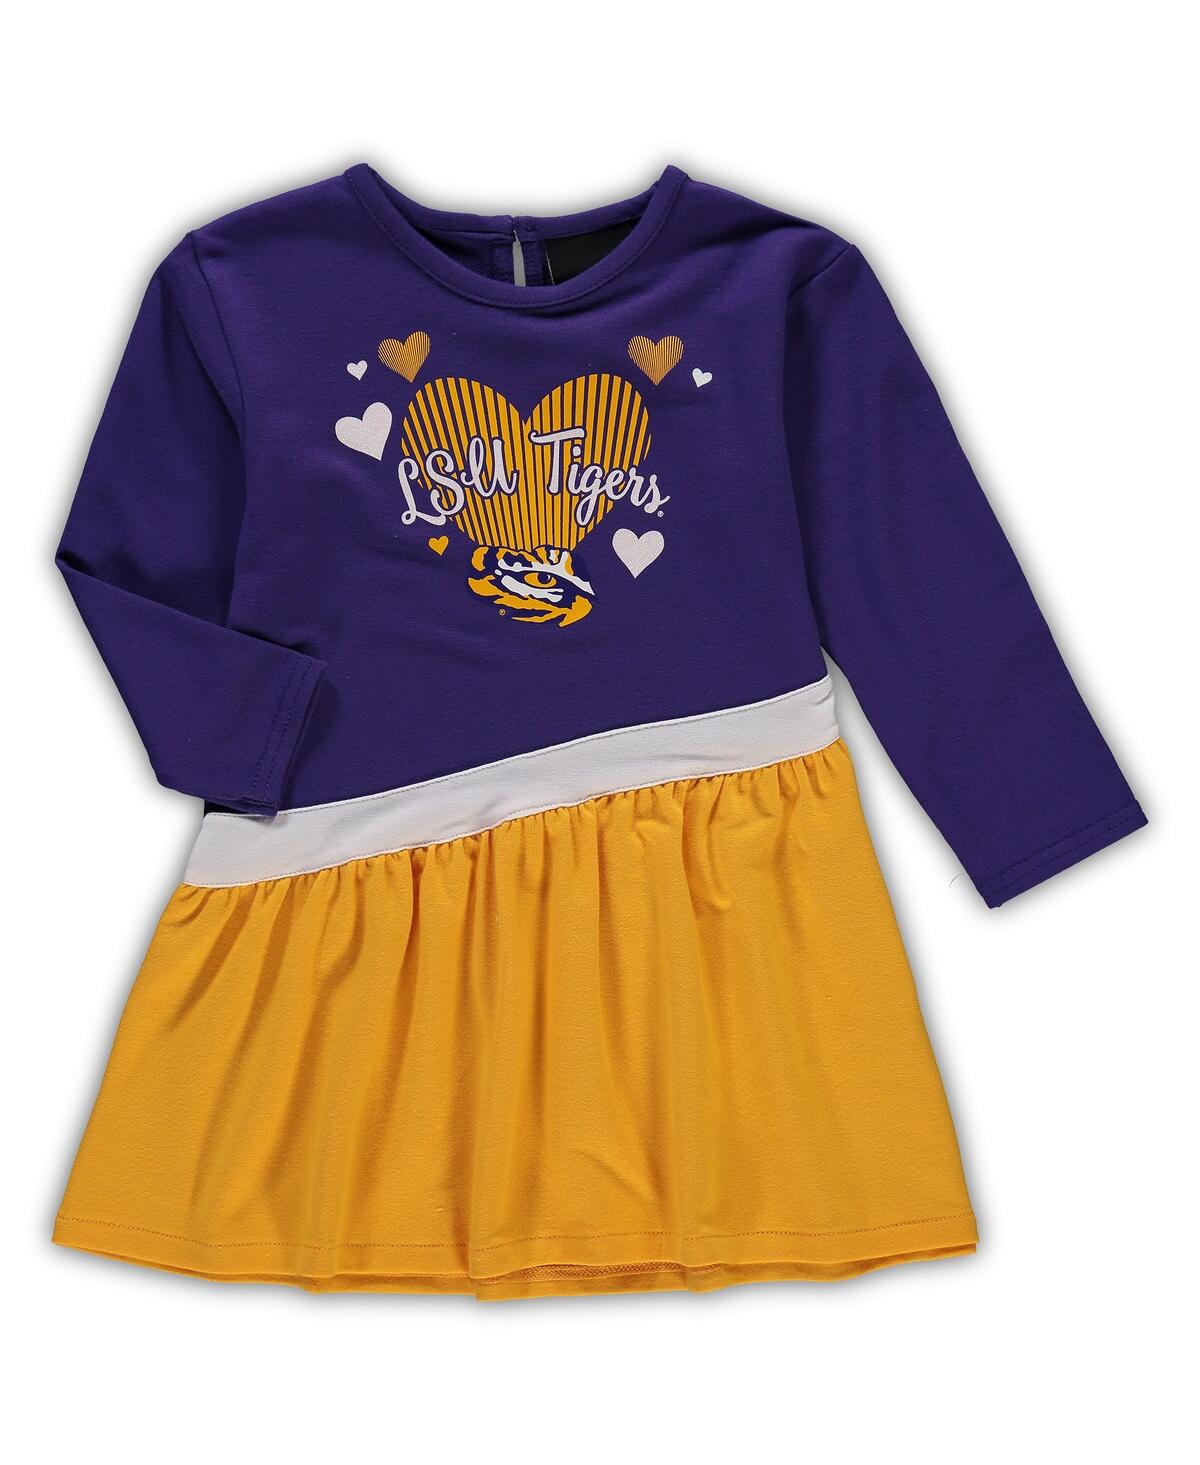 Shop Outerstuff Girls Infant Purple Lsu Tigers Heart French Terry Dress